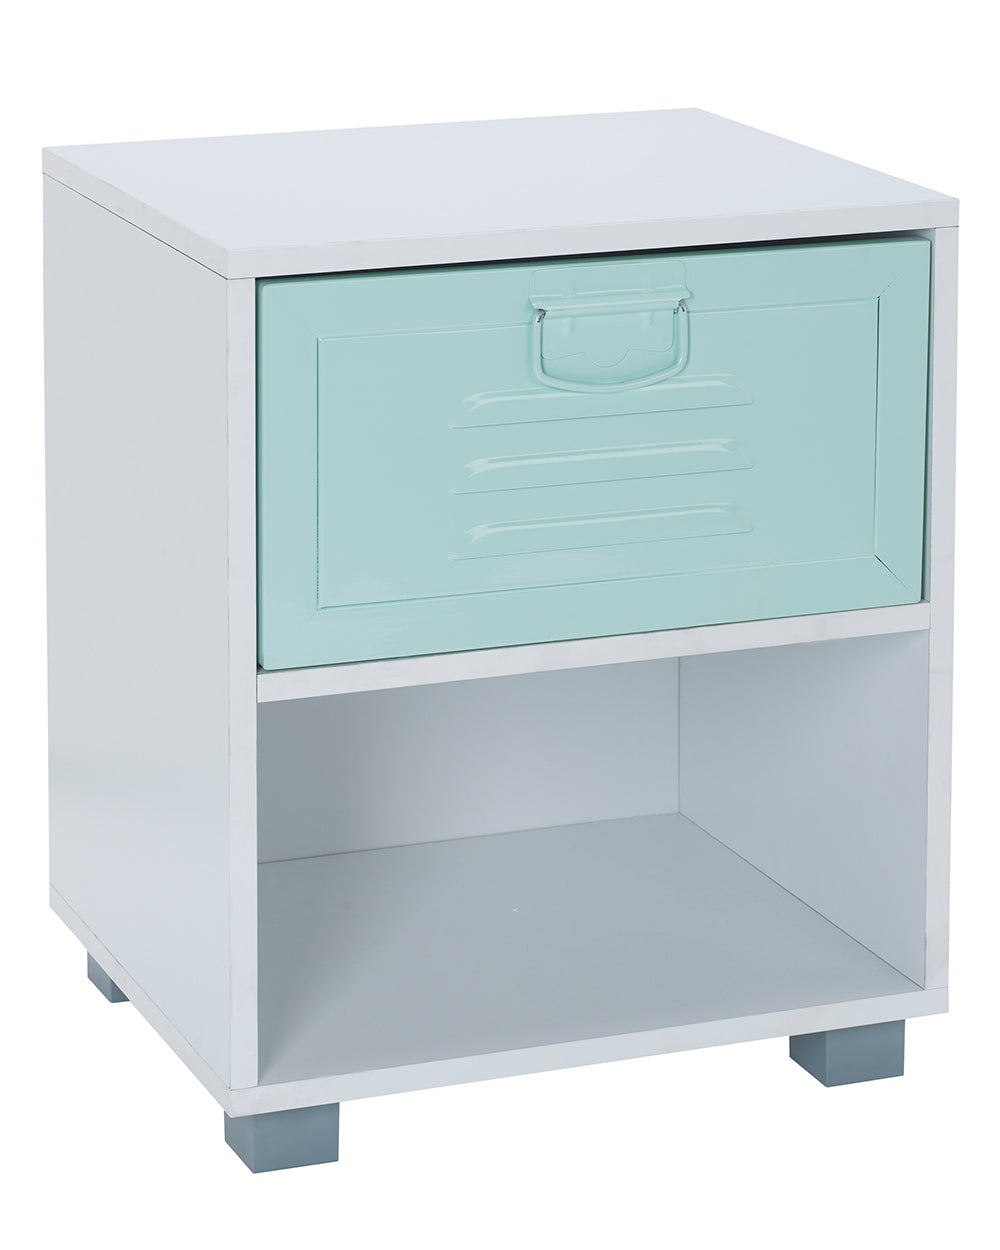 Industrial Bedside Table Retro White & Green side view bedside table on a white cut out background